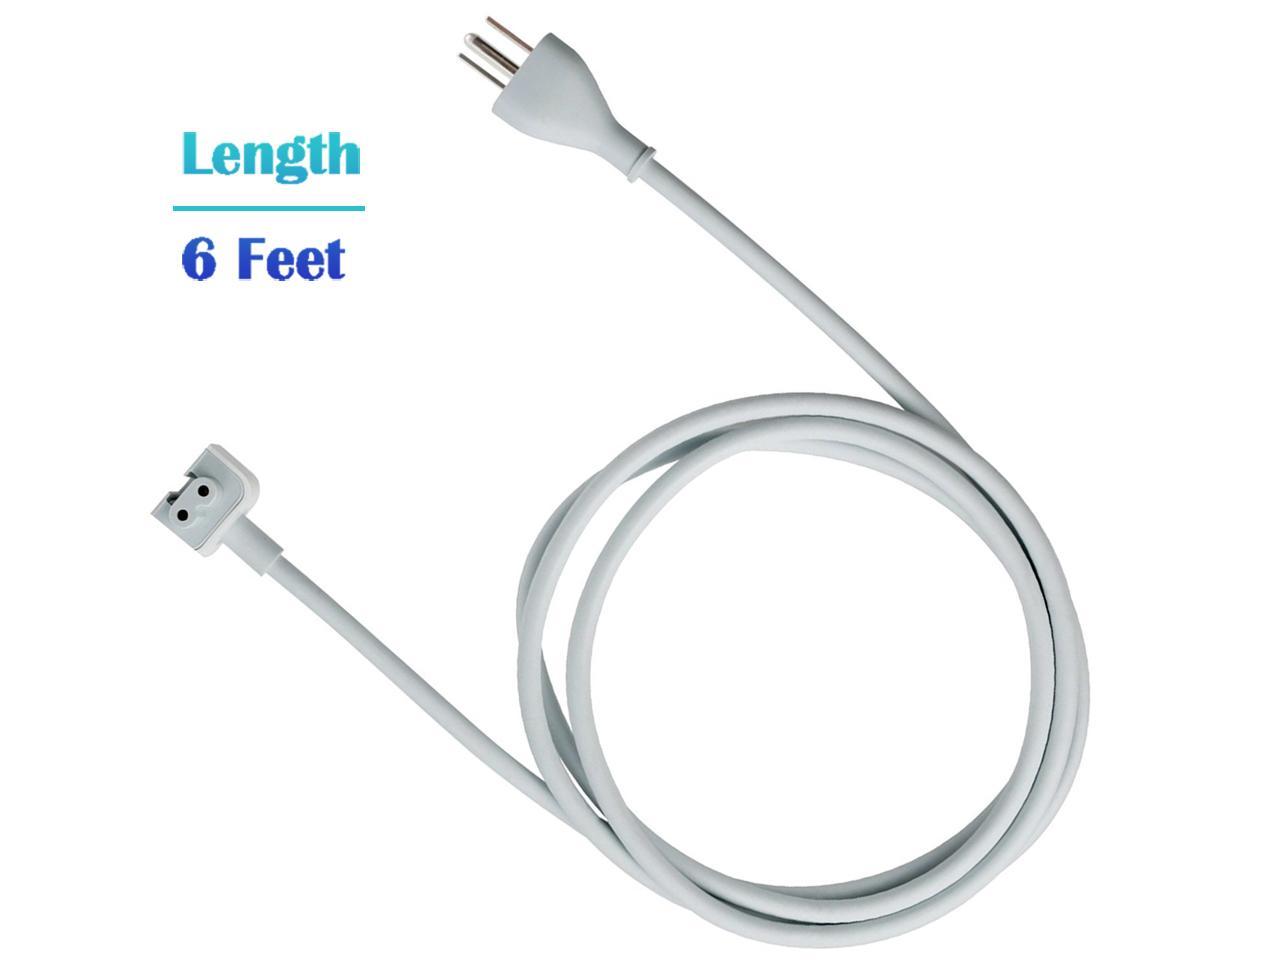 Genuine Apple Power Cord for Macbook/ Pro Charger Power Extension Cable 6ft